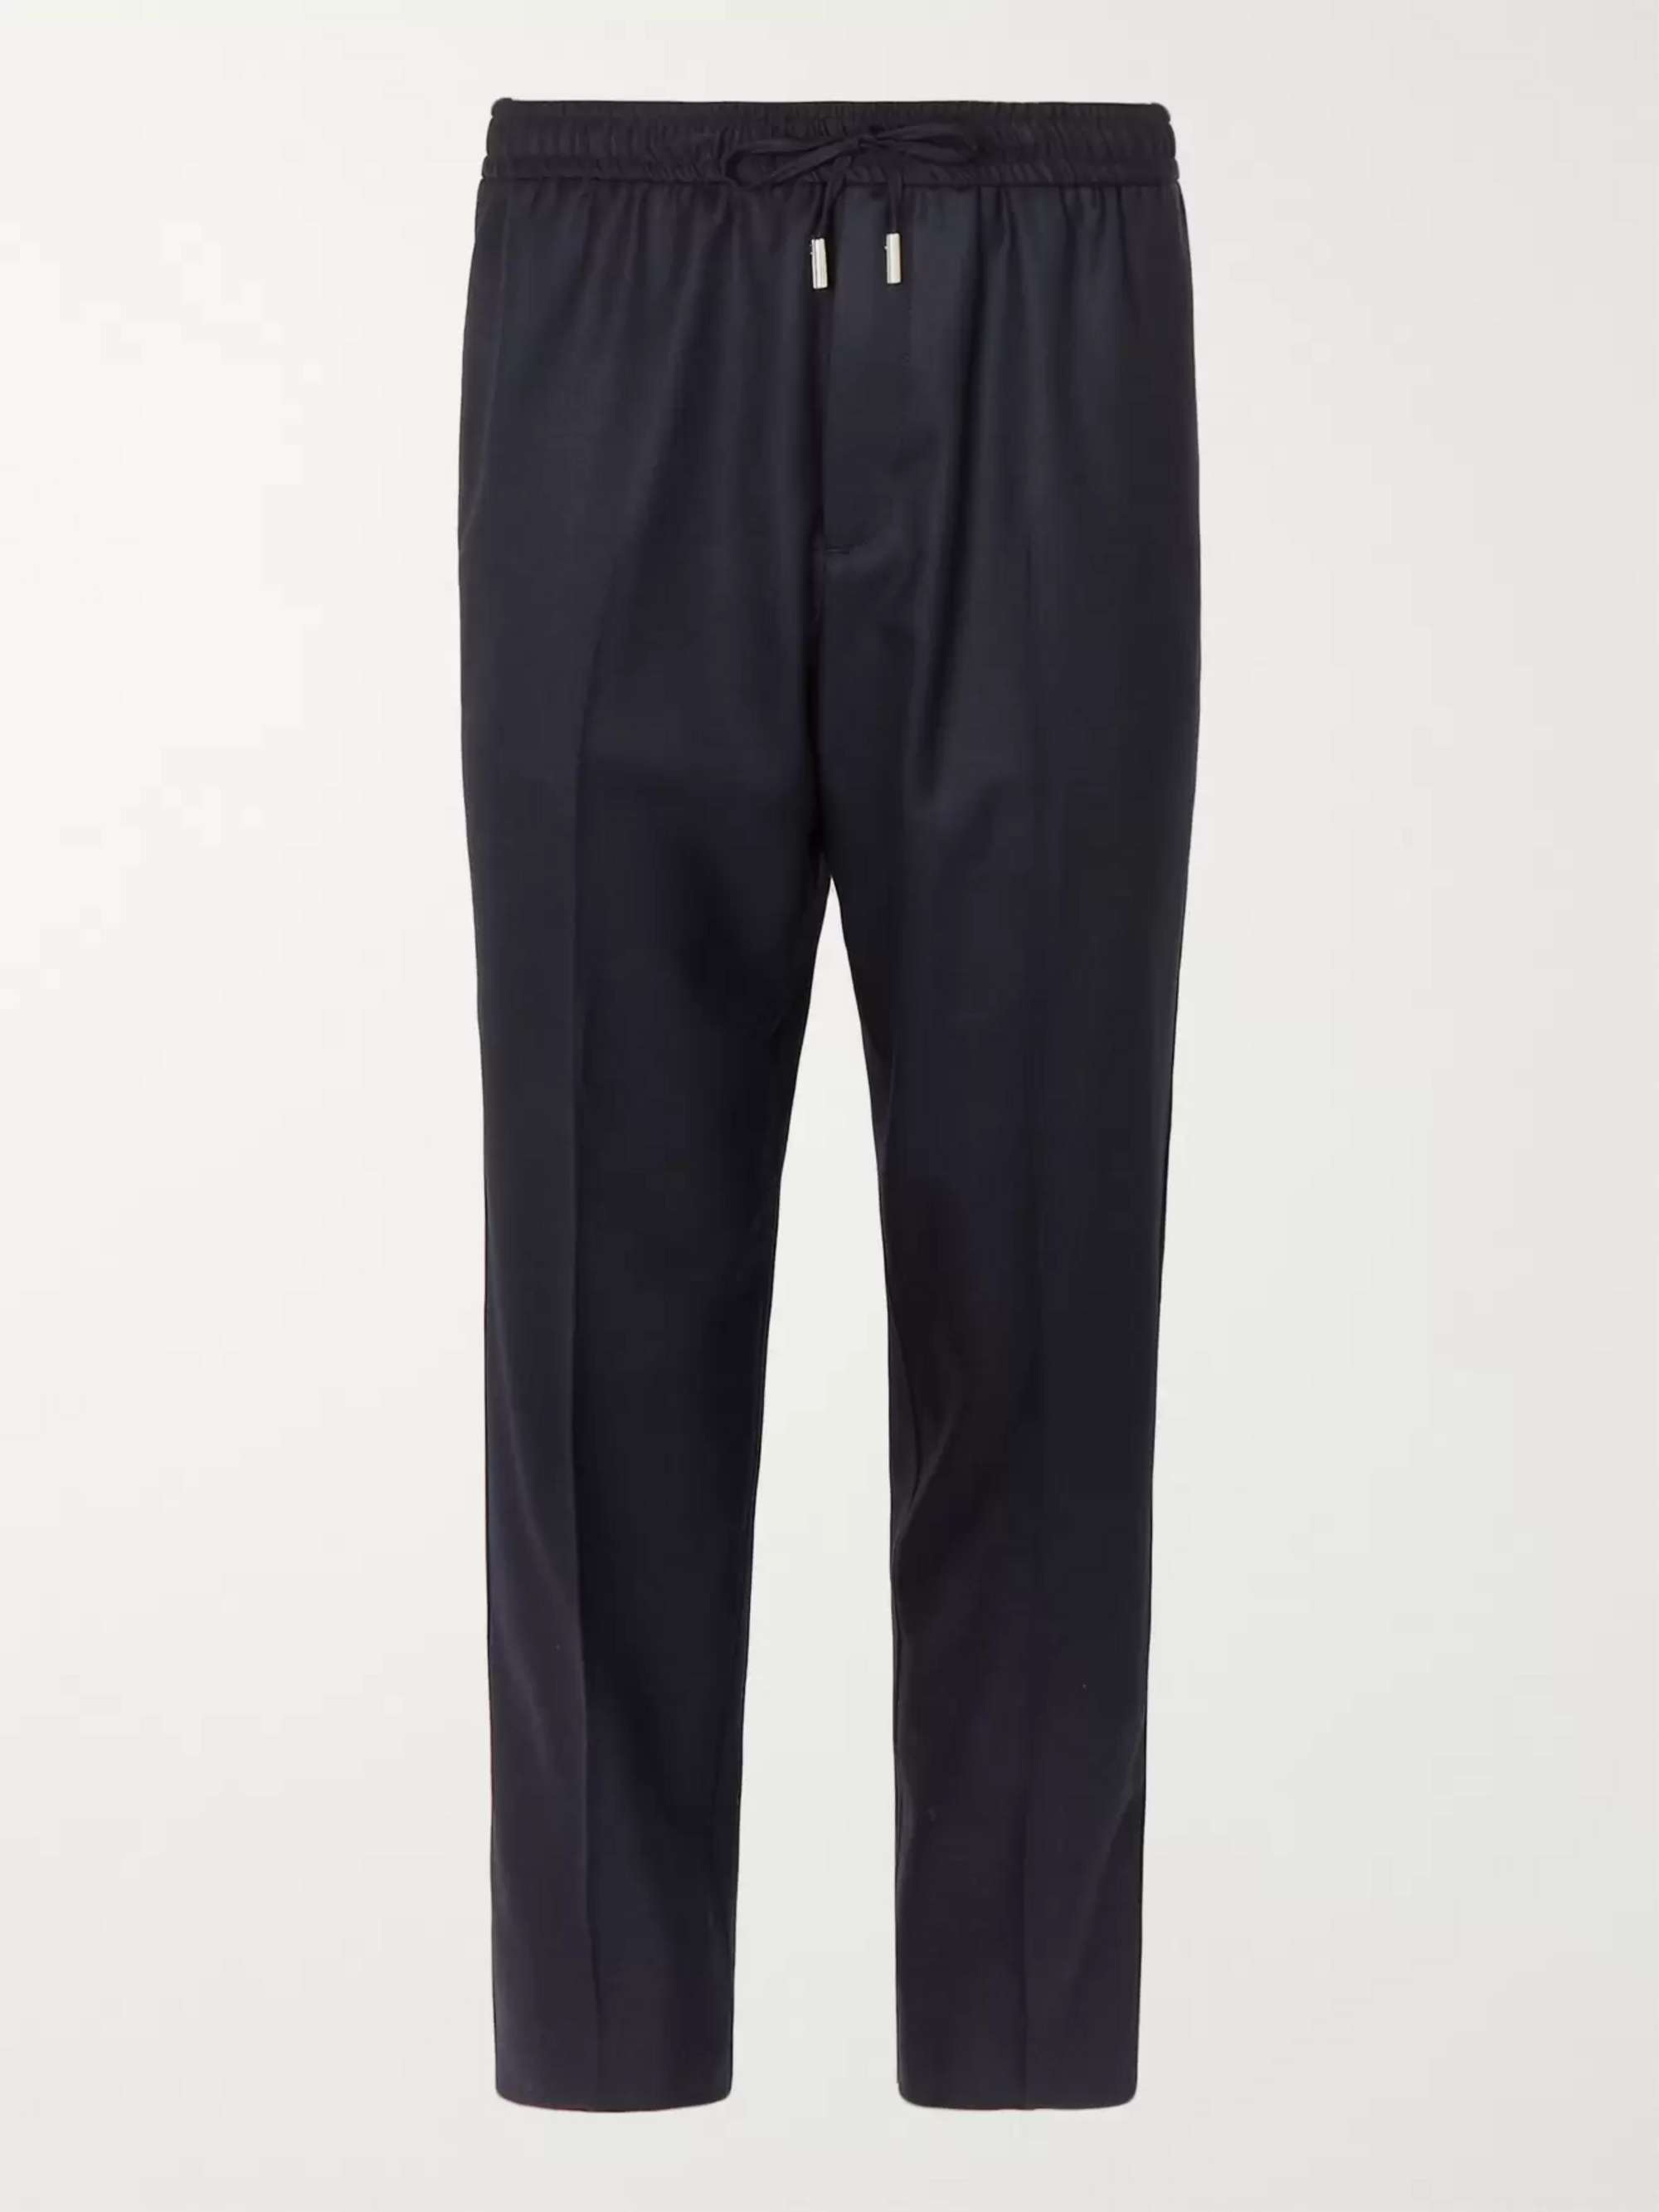 MR P. Slim-Fit Midnight-Blue Worsted-Wool Drawstring Trousers | MR PORTER